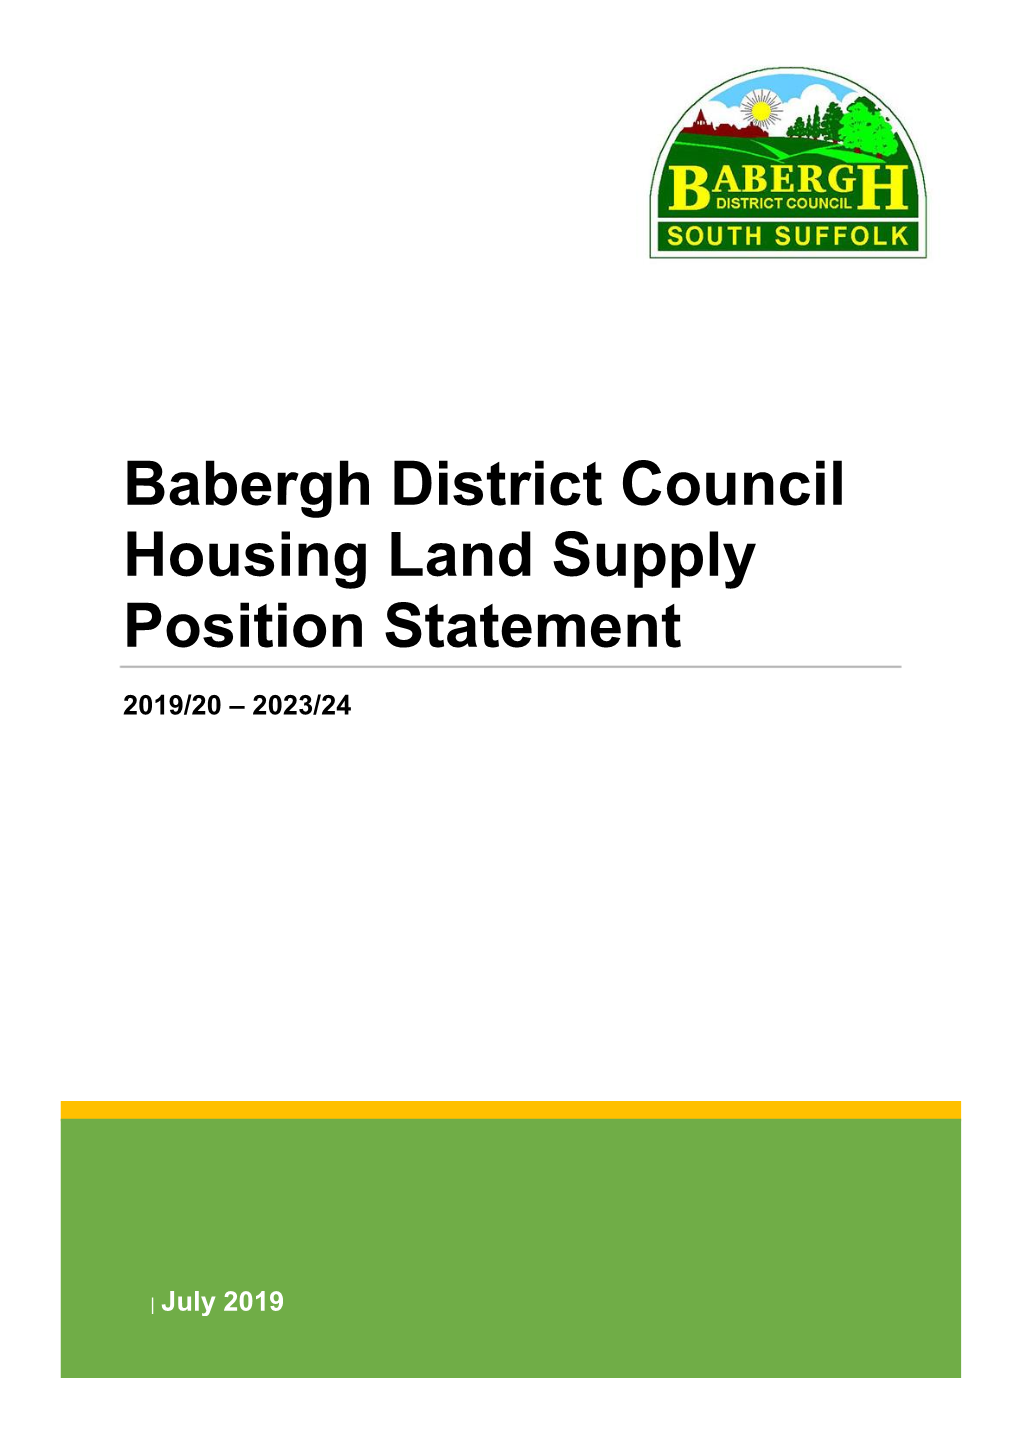 Babergh District Council Housing Land Supply Position Statement